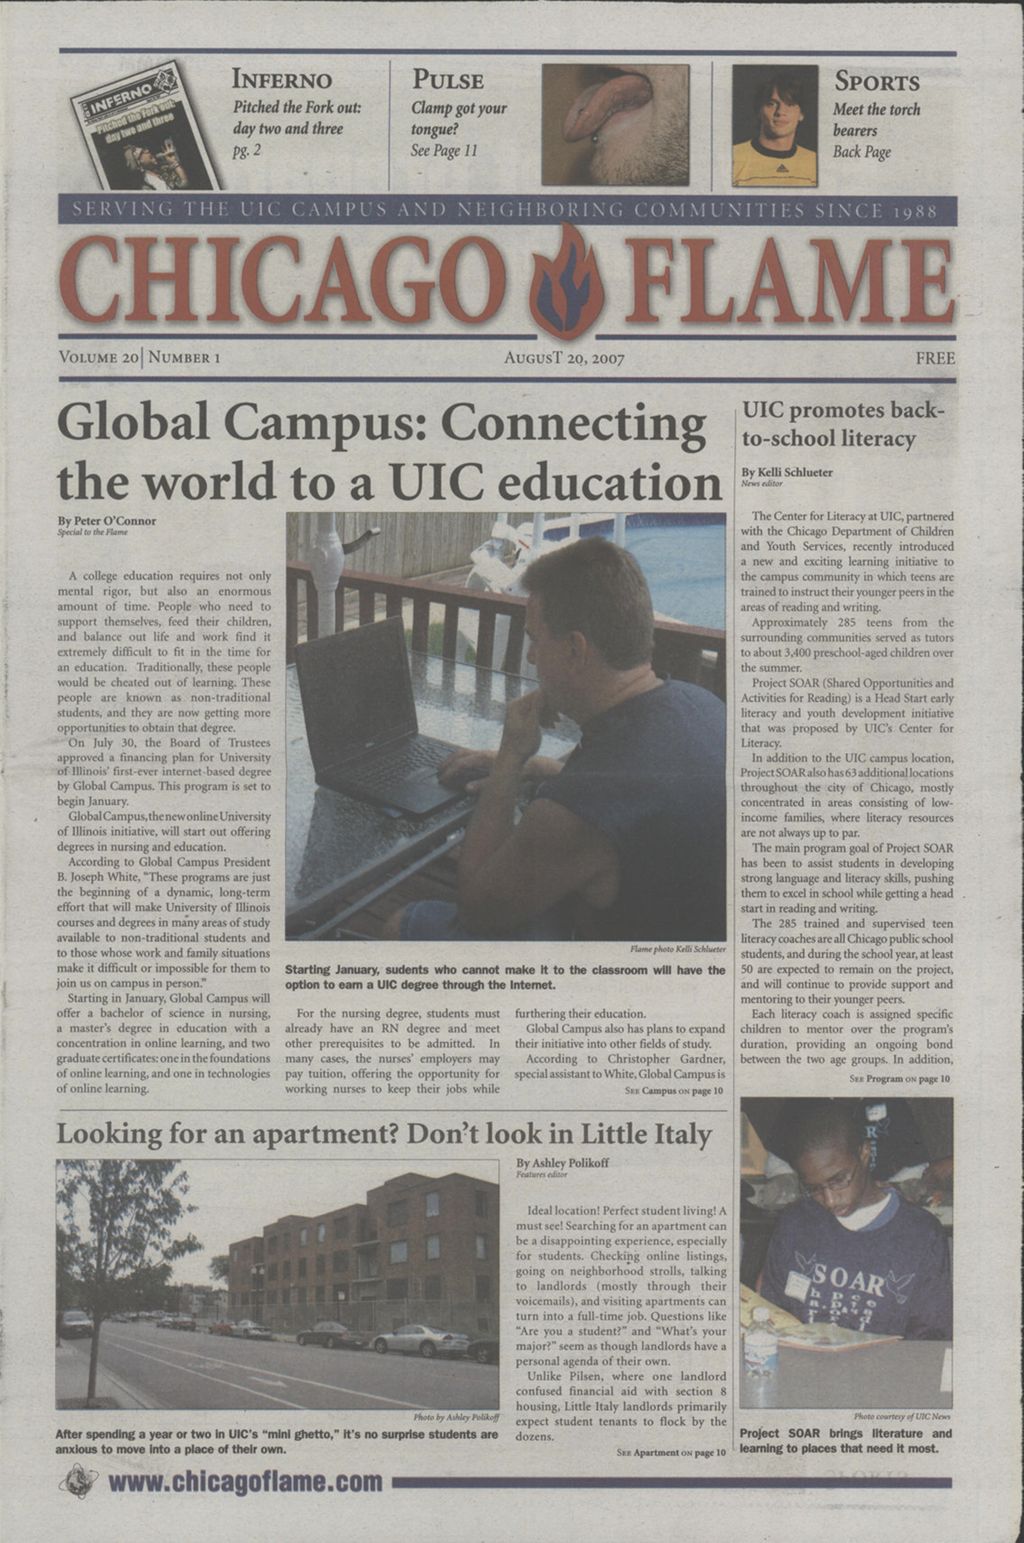 Miniature of Chicago Flame (August 20, 2007)